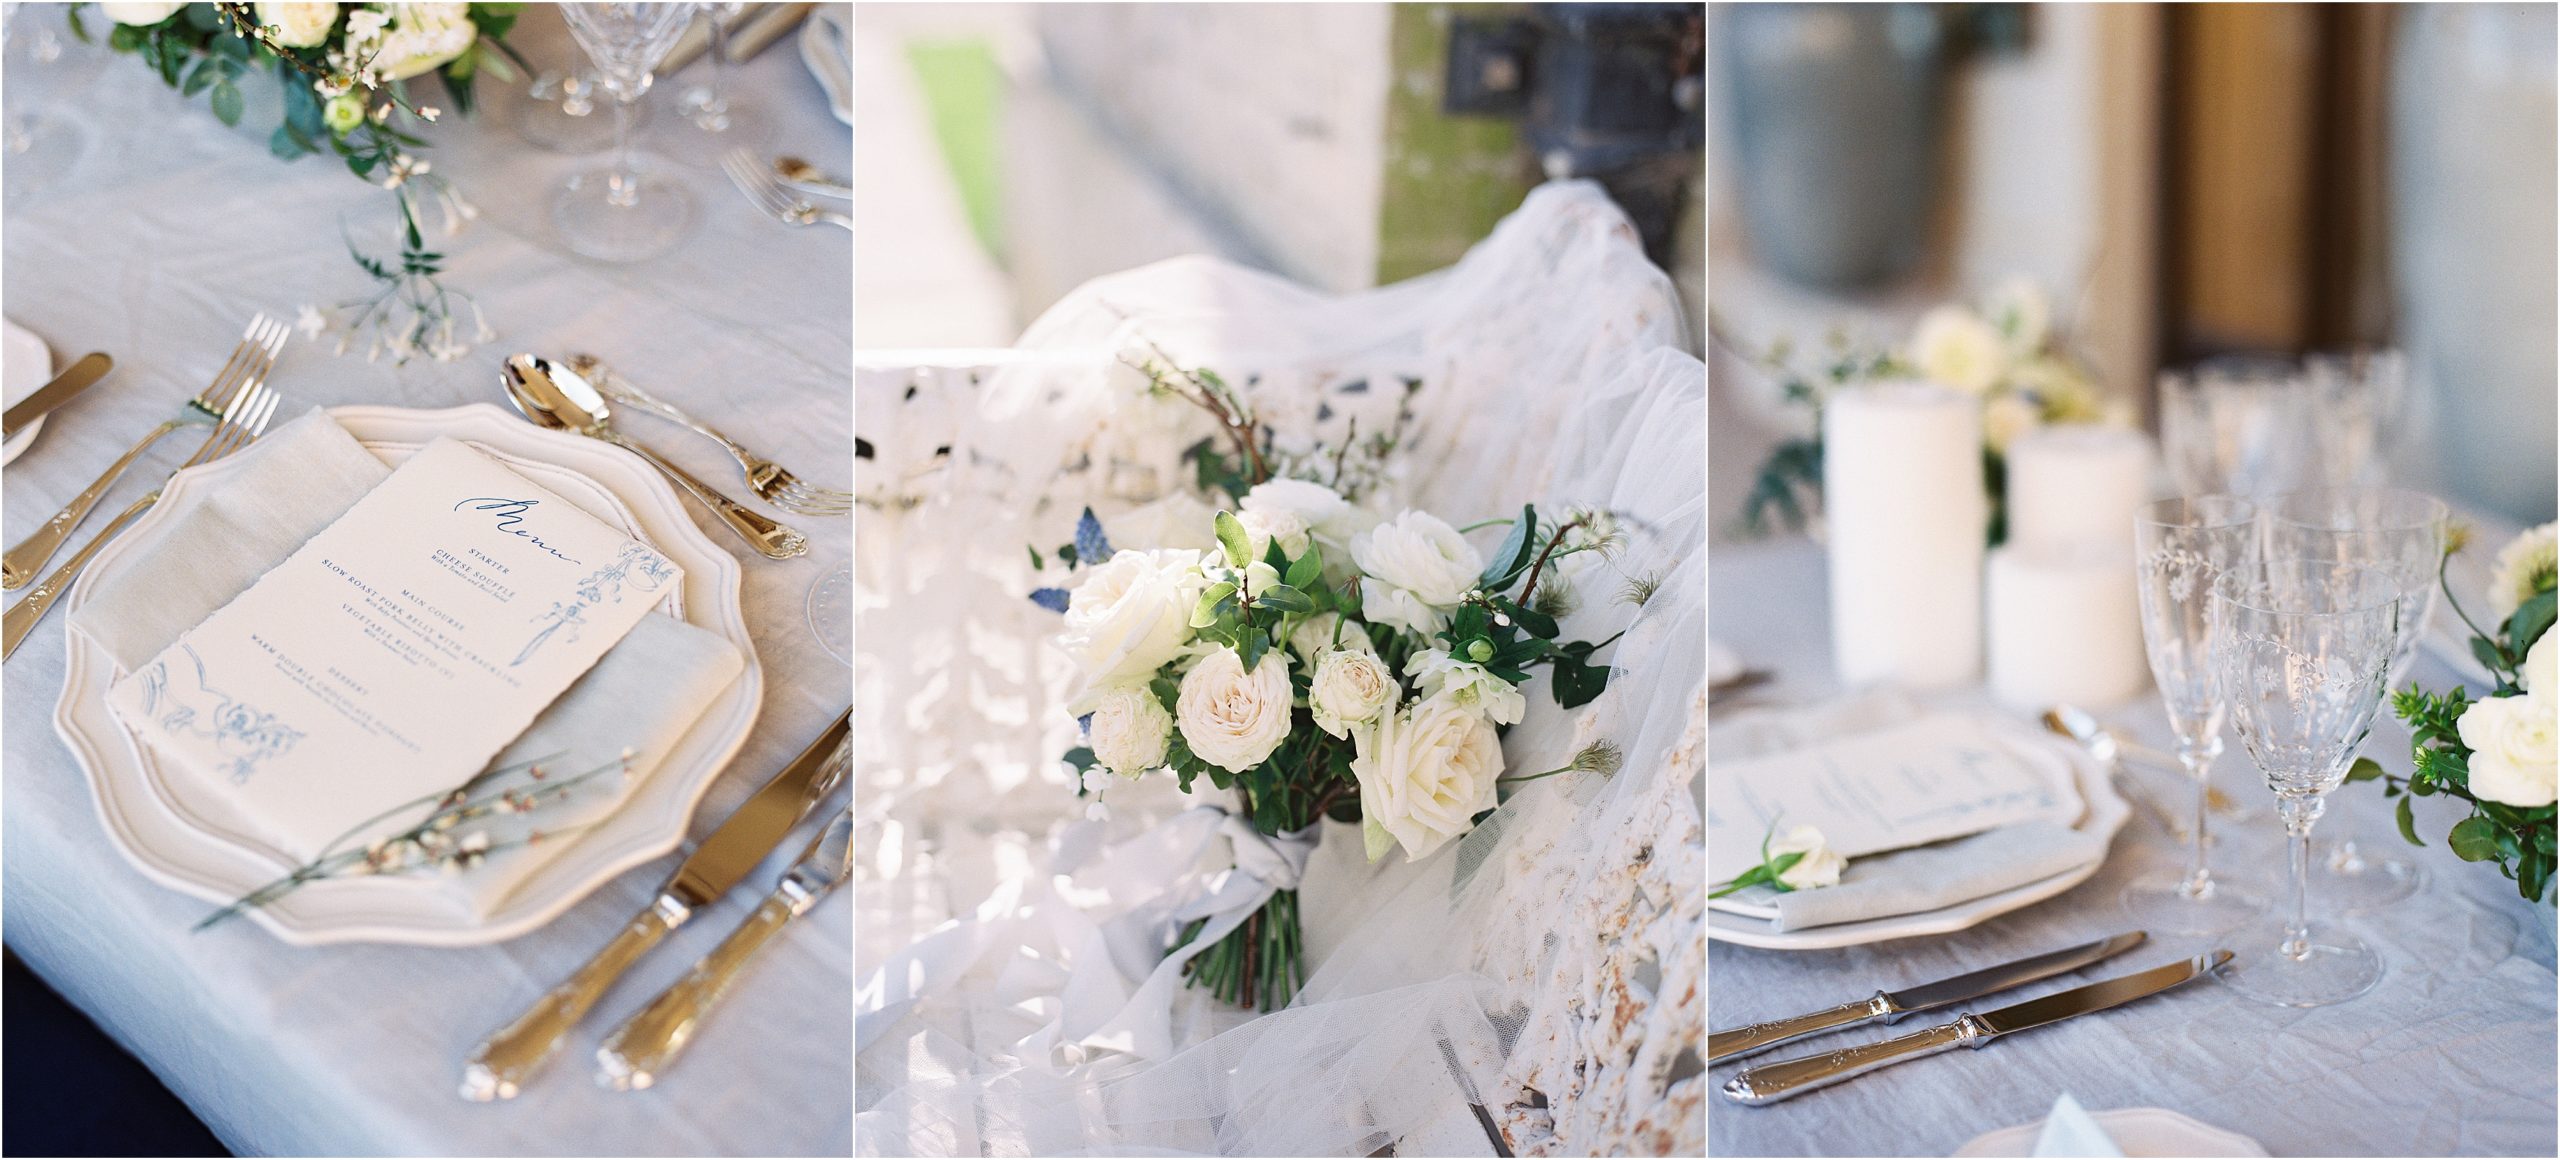 Wedding details in blue and white captured on film